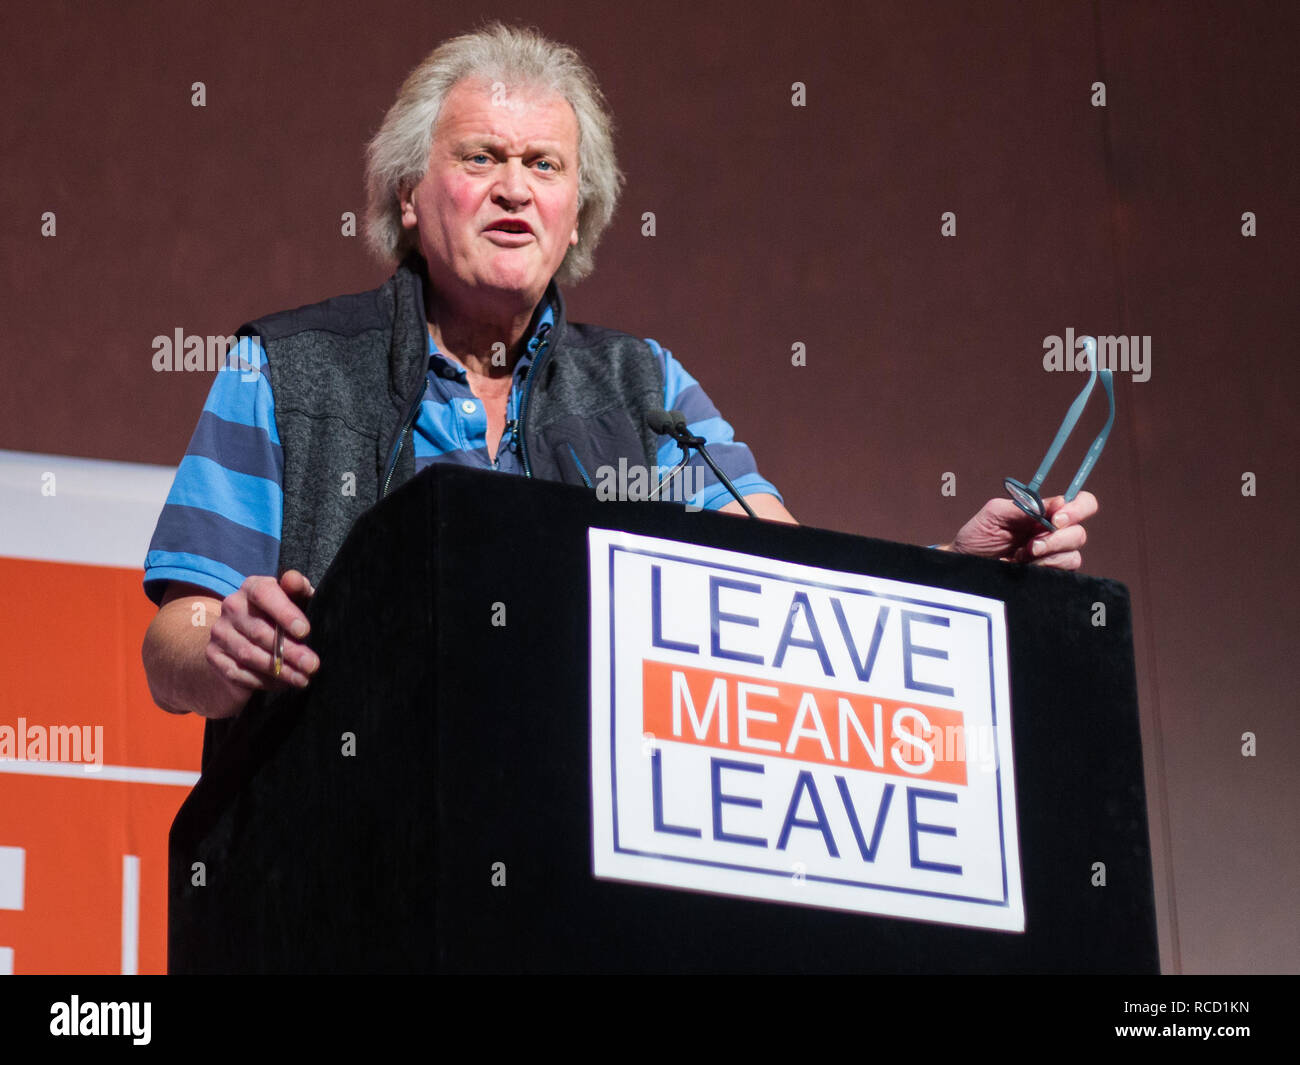 'Leave Means Leave' rally held at Queen Elizabeth II Conference Centre  Featuring: Tim Martin Where: London, United Kingdom When: 14 Dec 2018 Credit: Wheatley/WENN Stock Photo